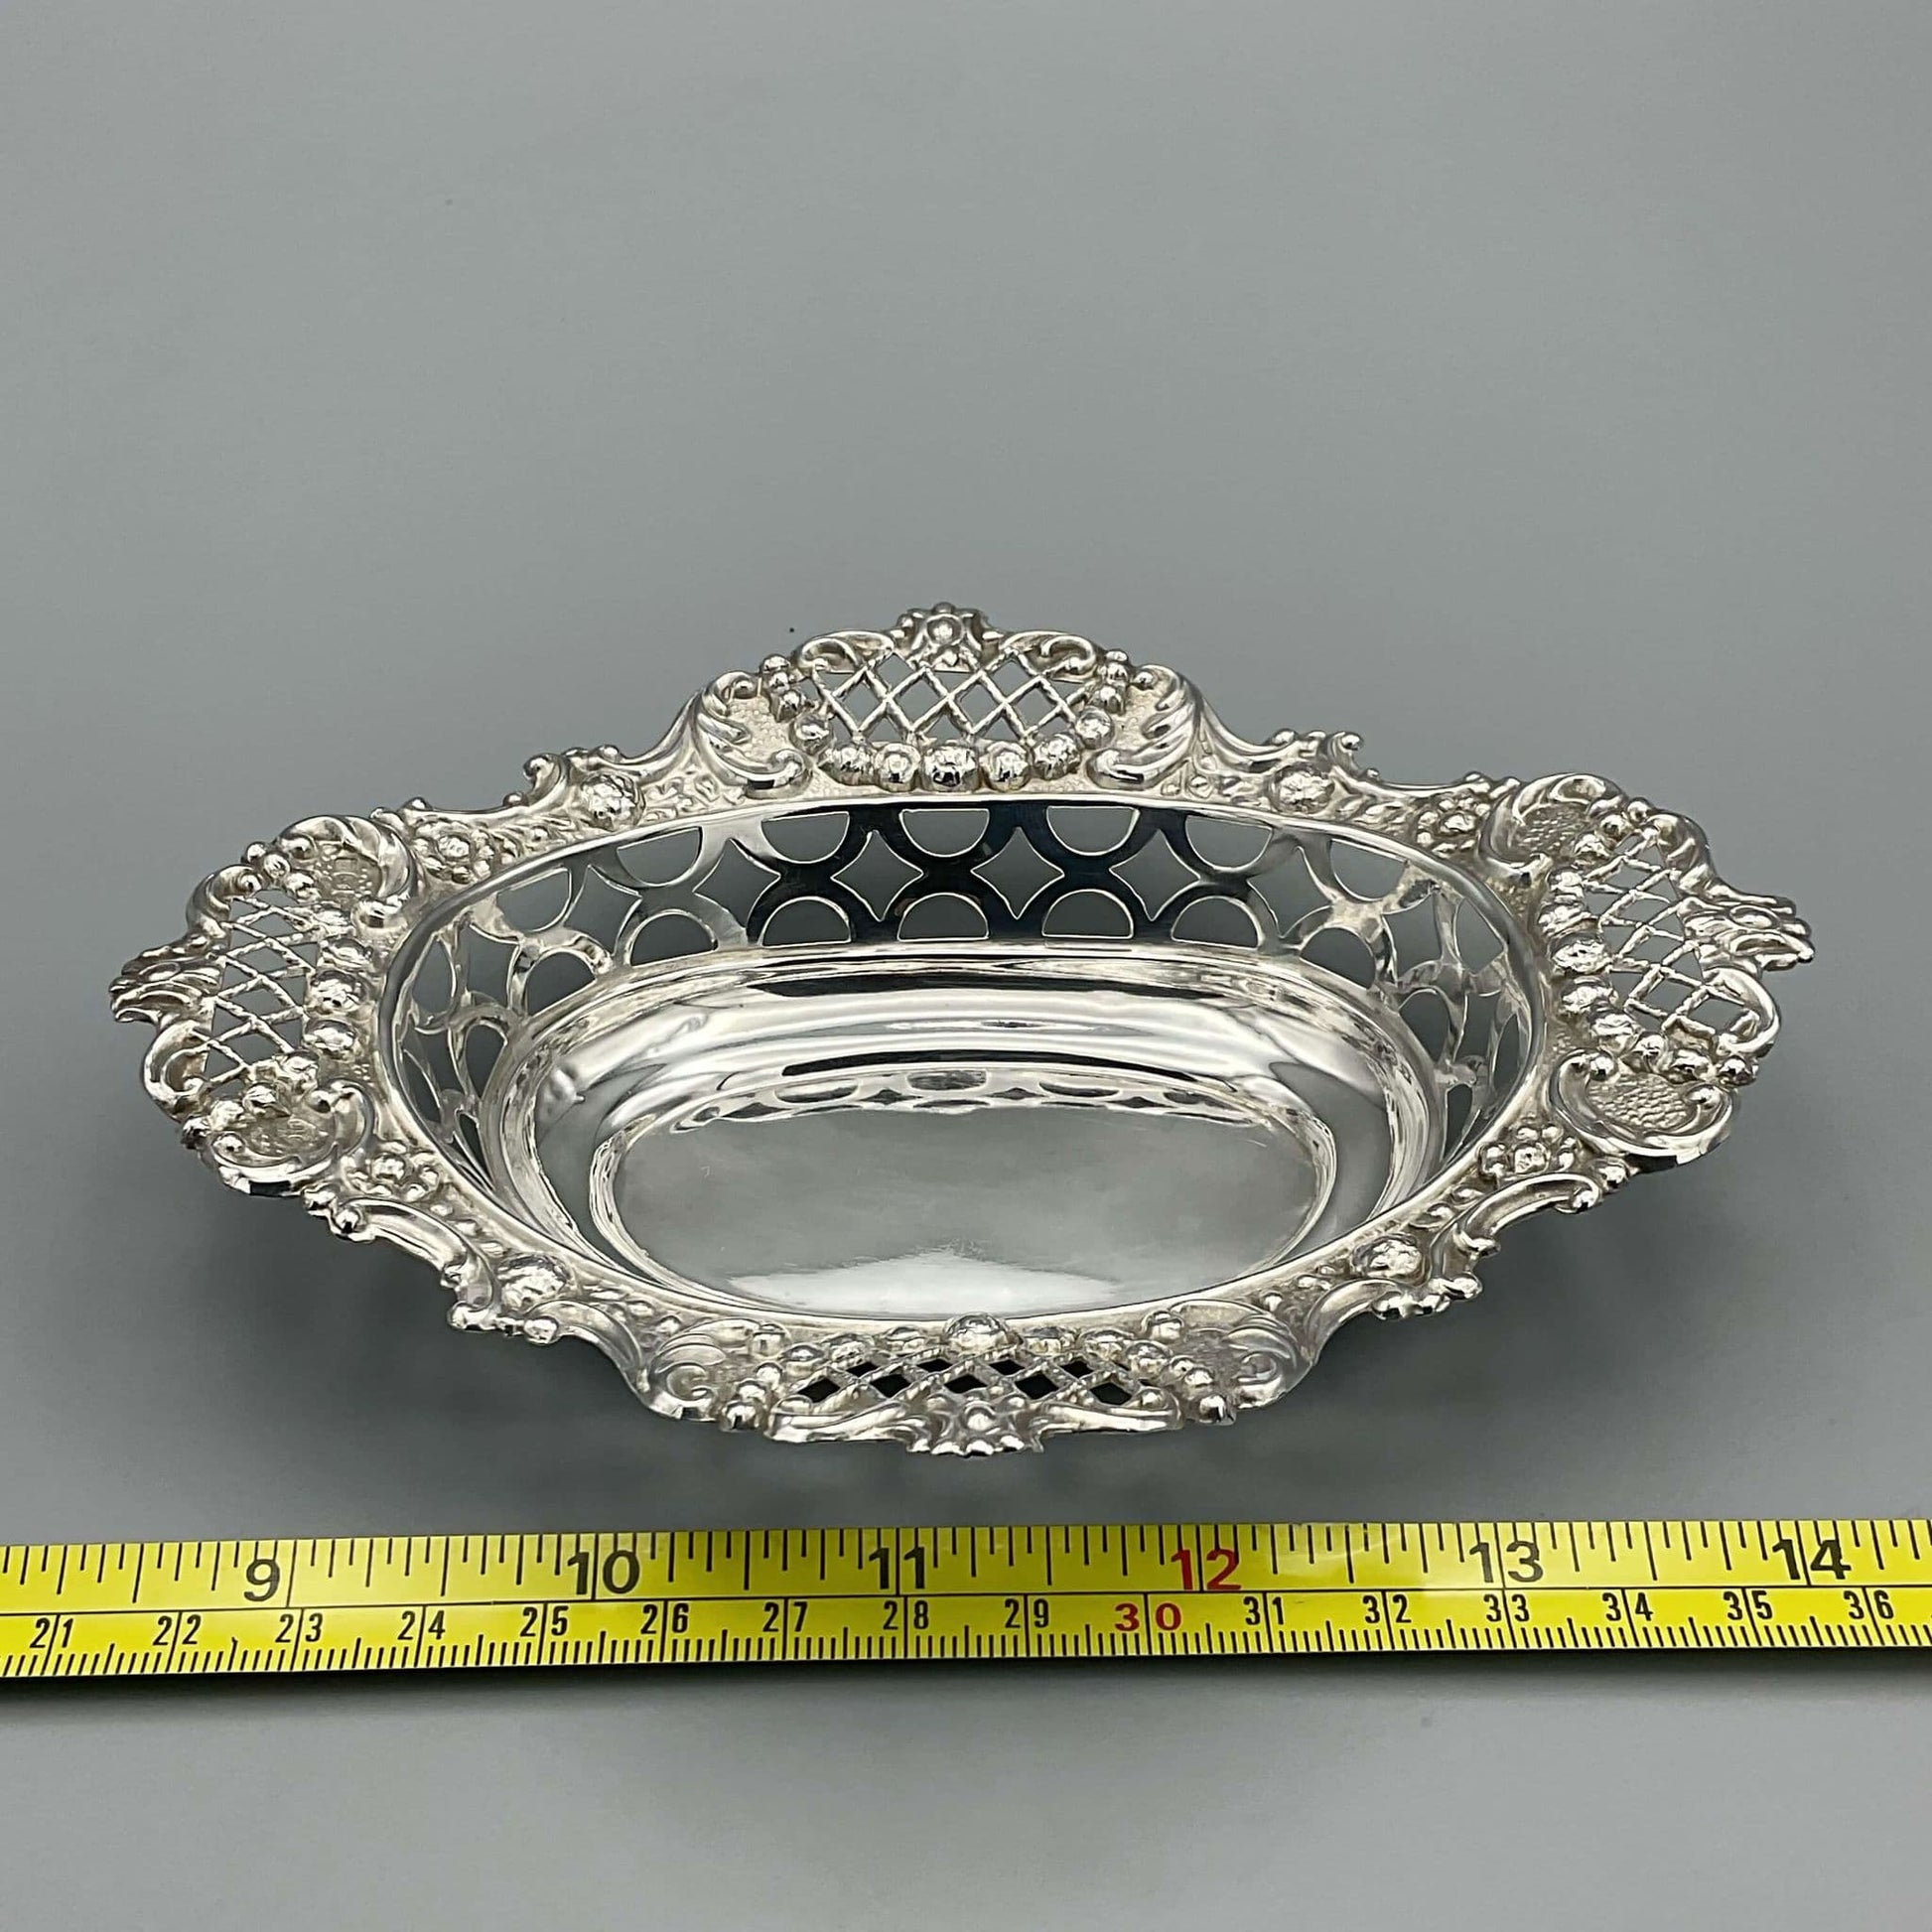 Ornate silver pierced bowl on grey background With tape measure showing size as approximately 15cm